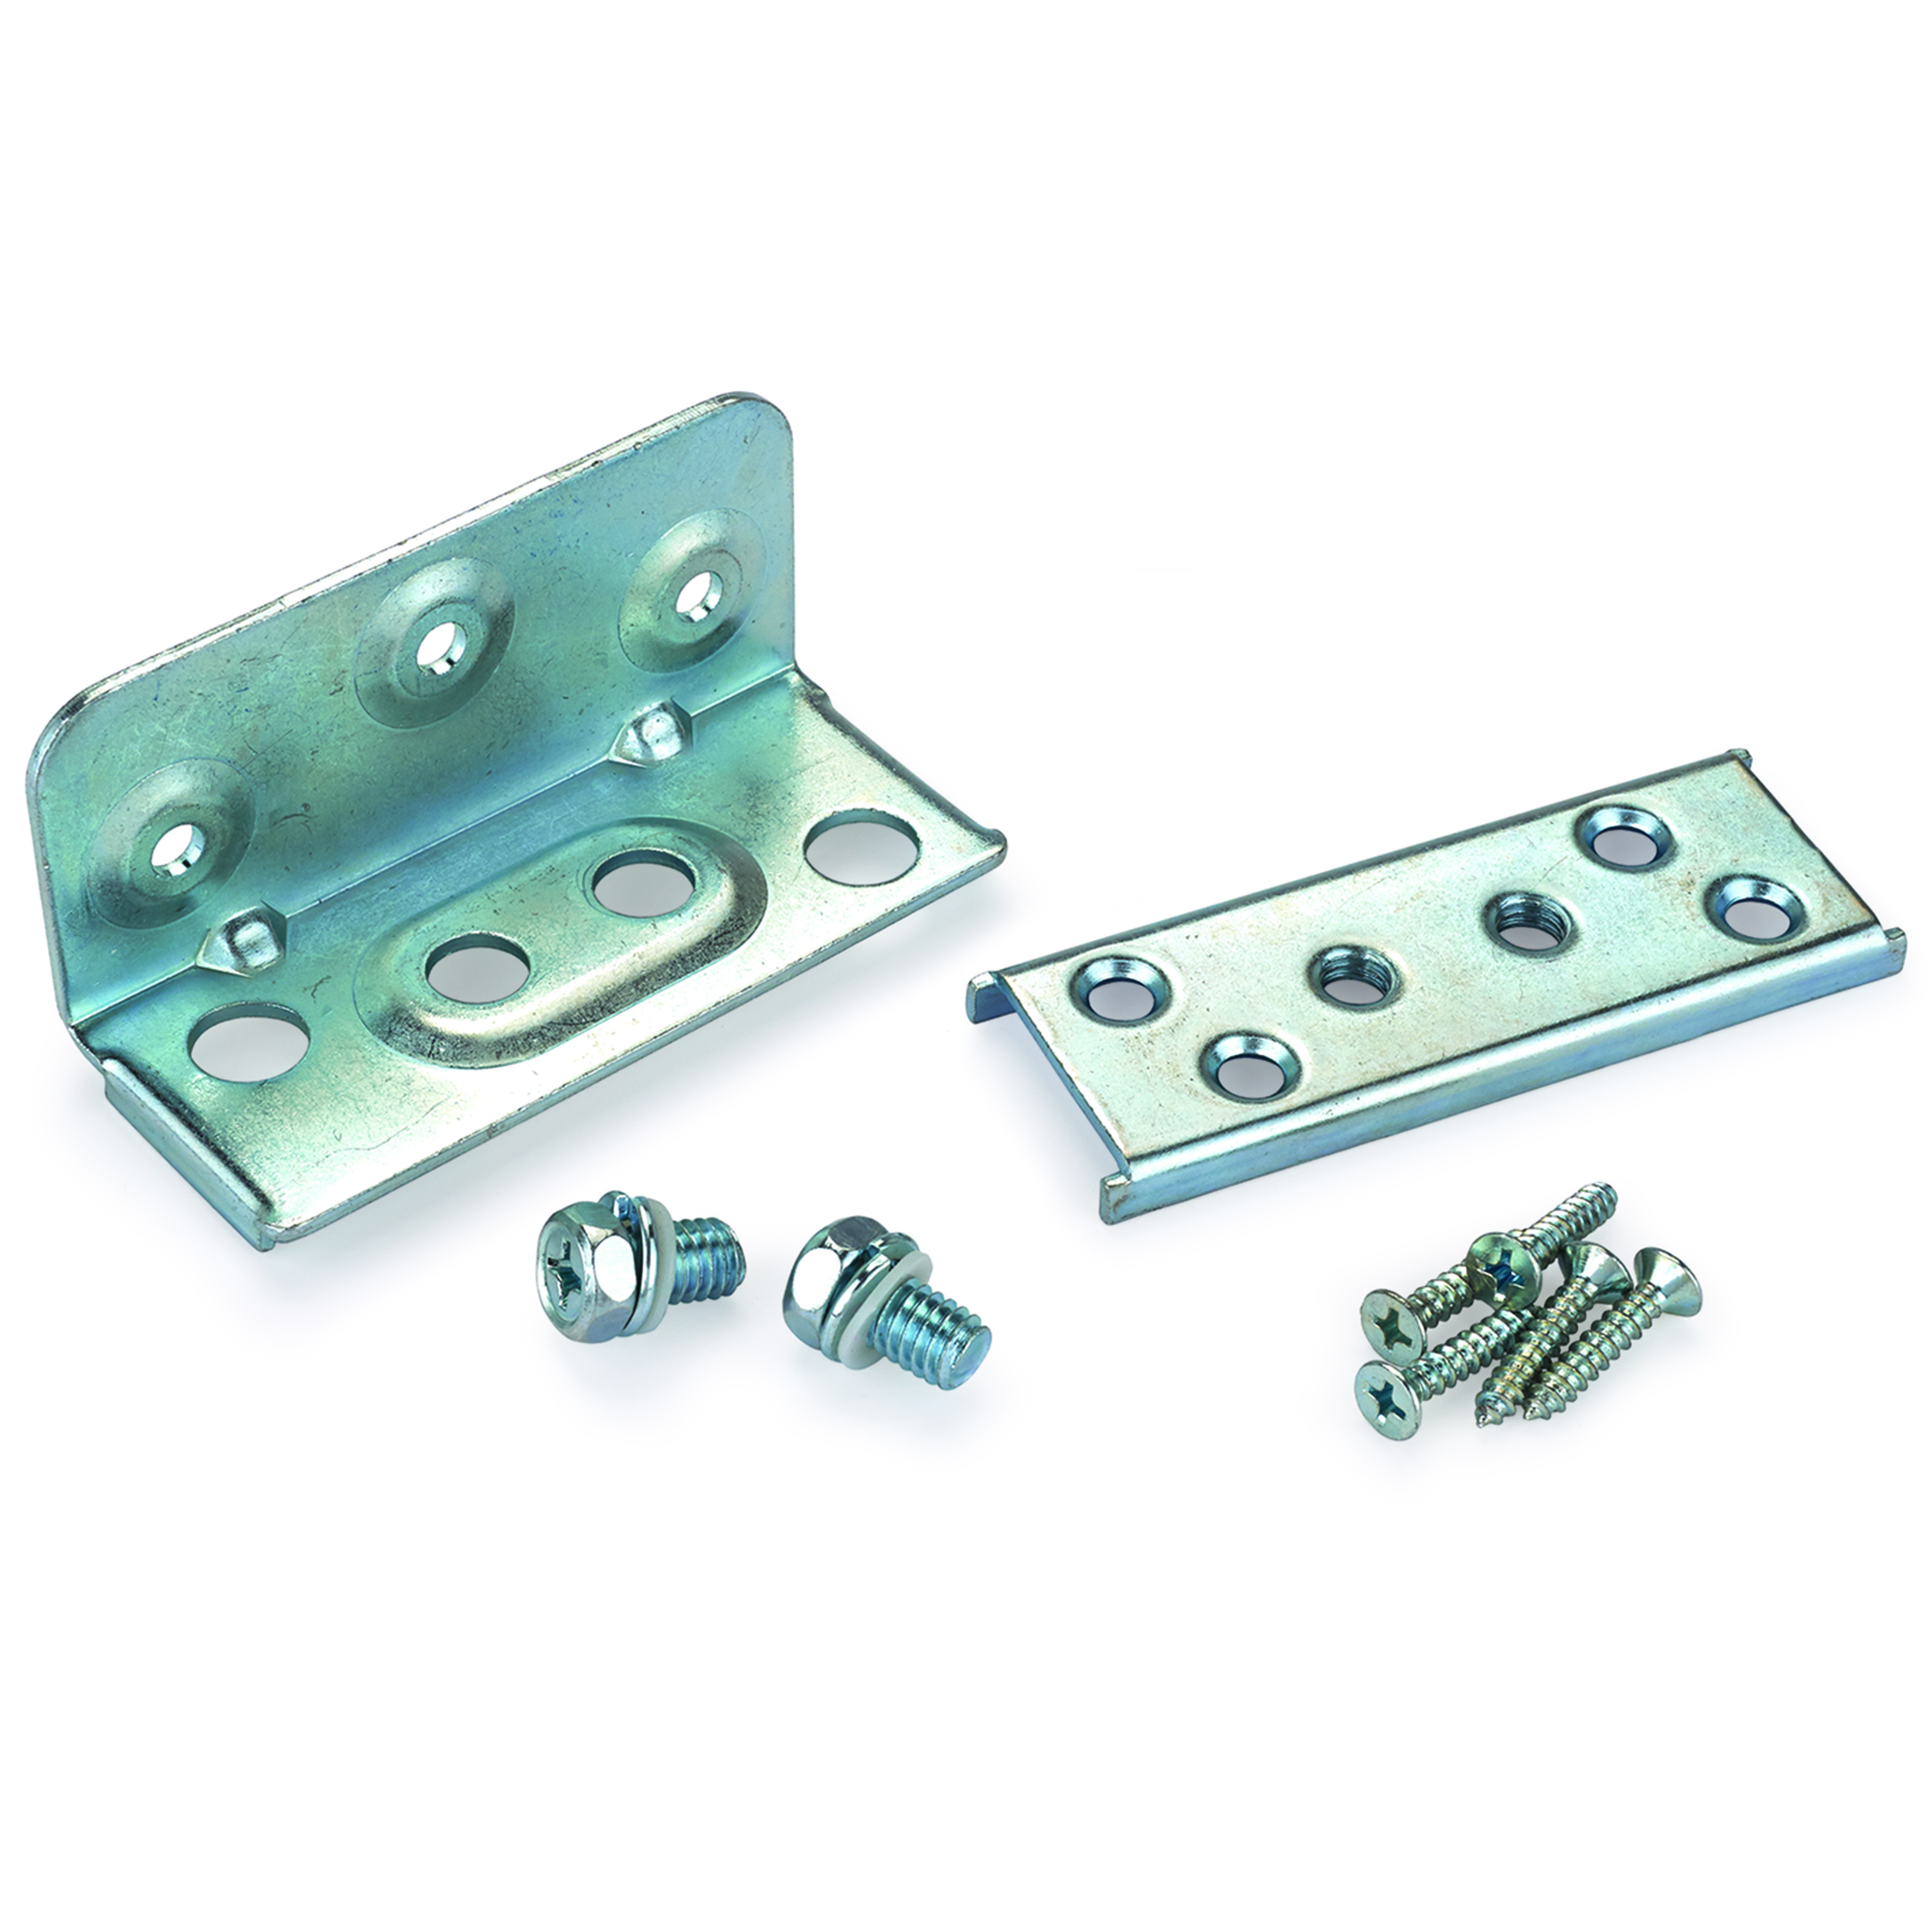 Surface-mount Knock Down Low Profile Bed Frame Hardware